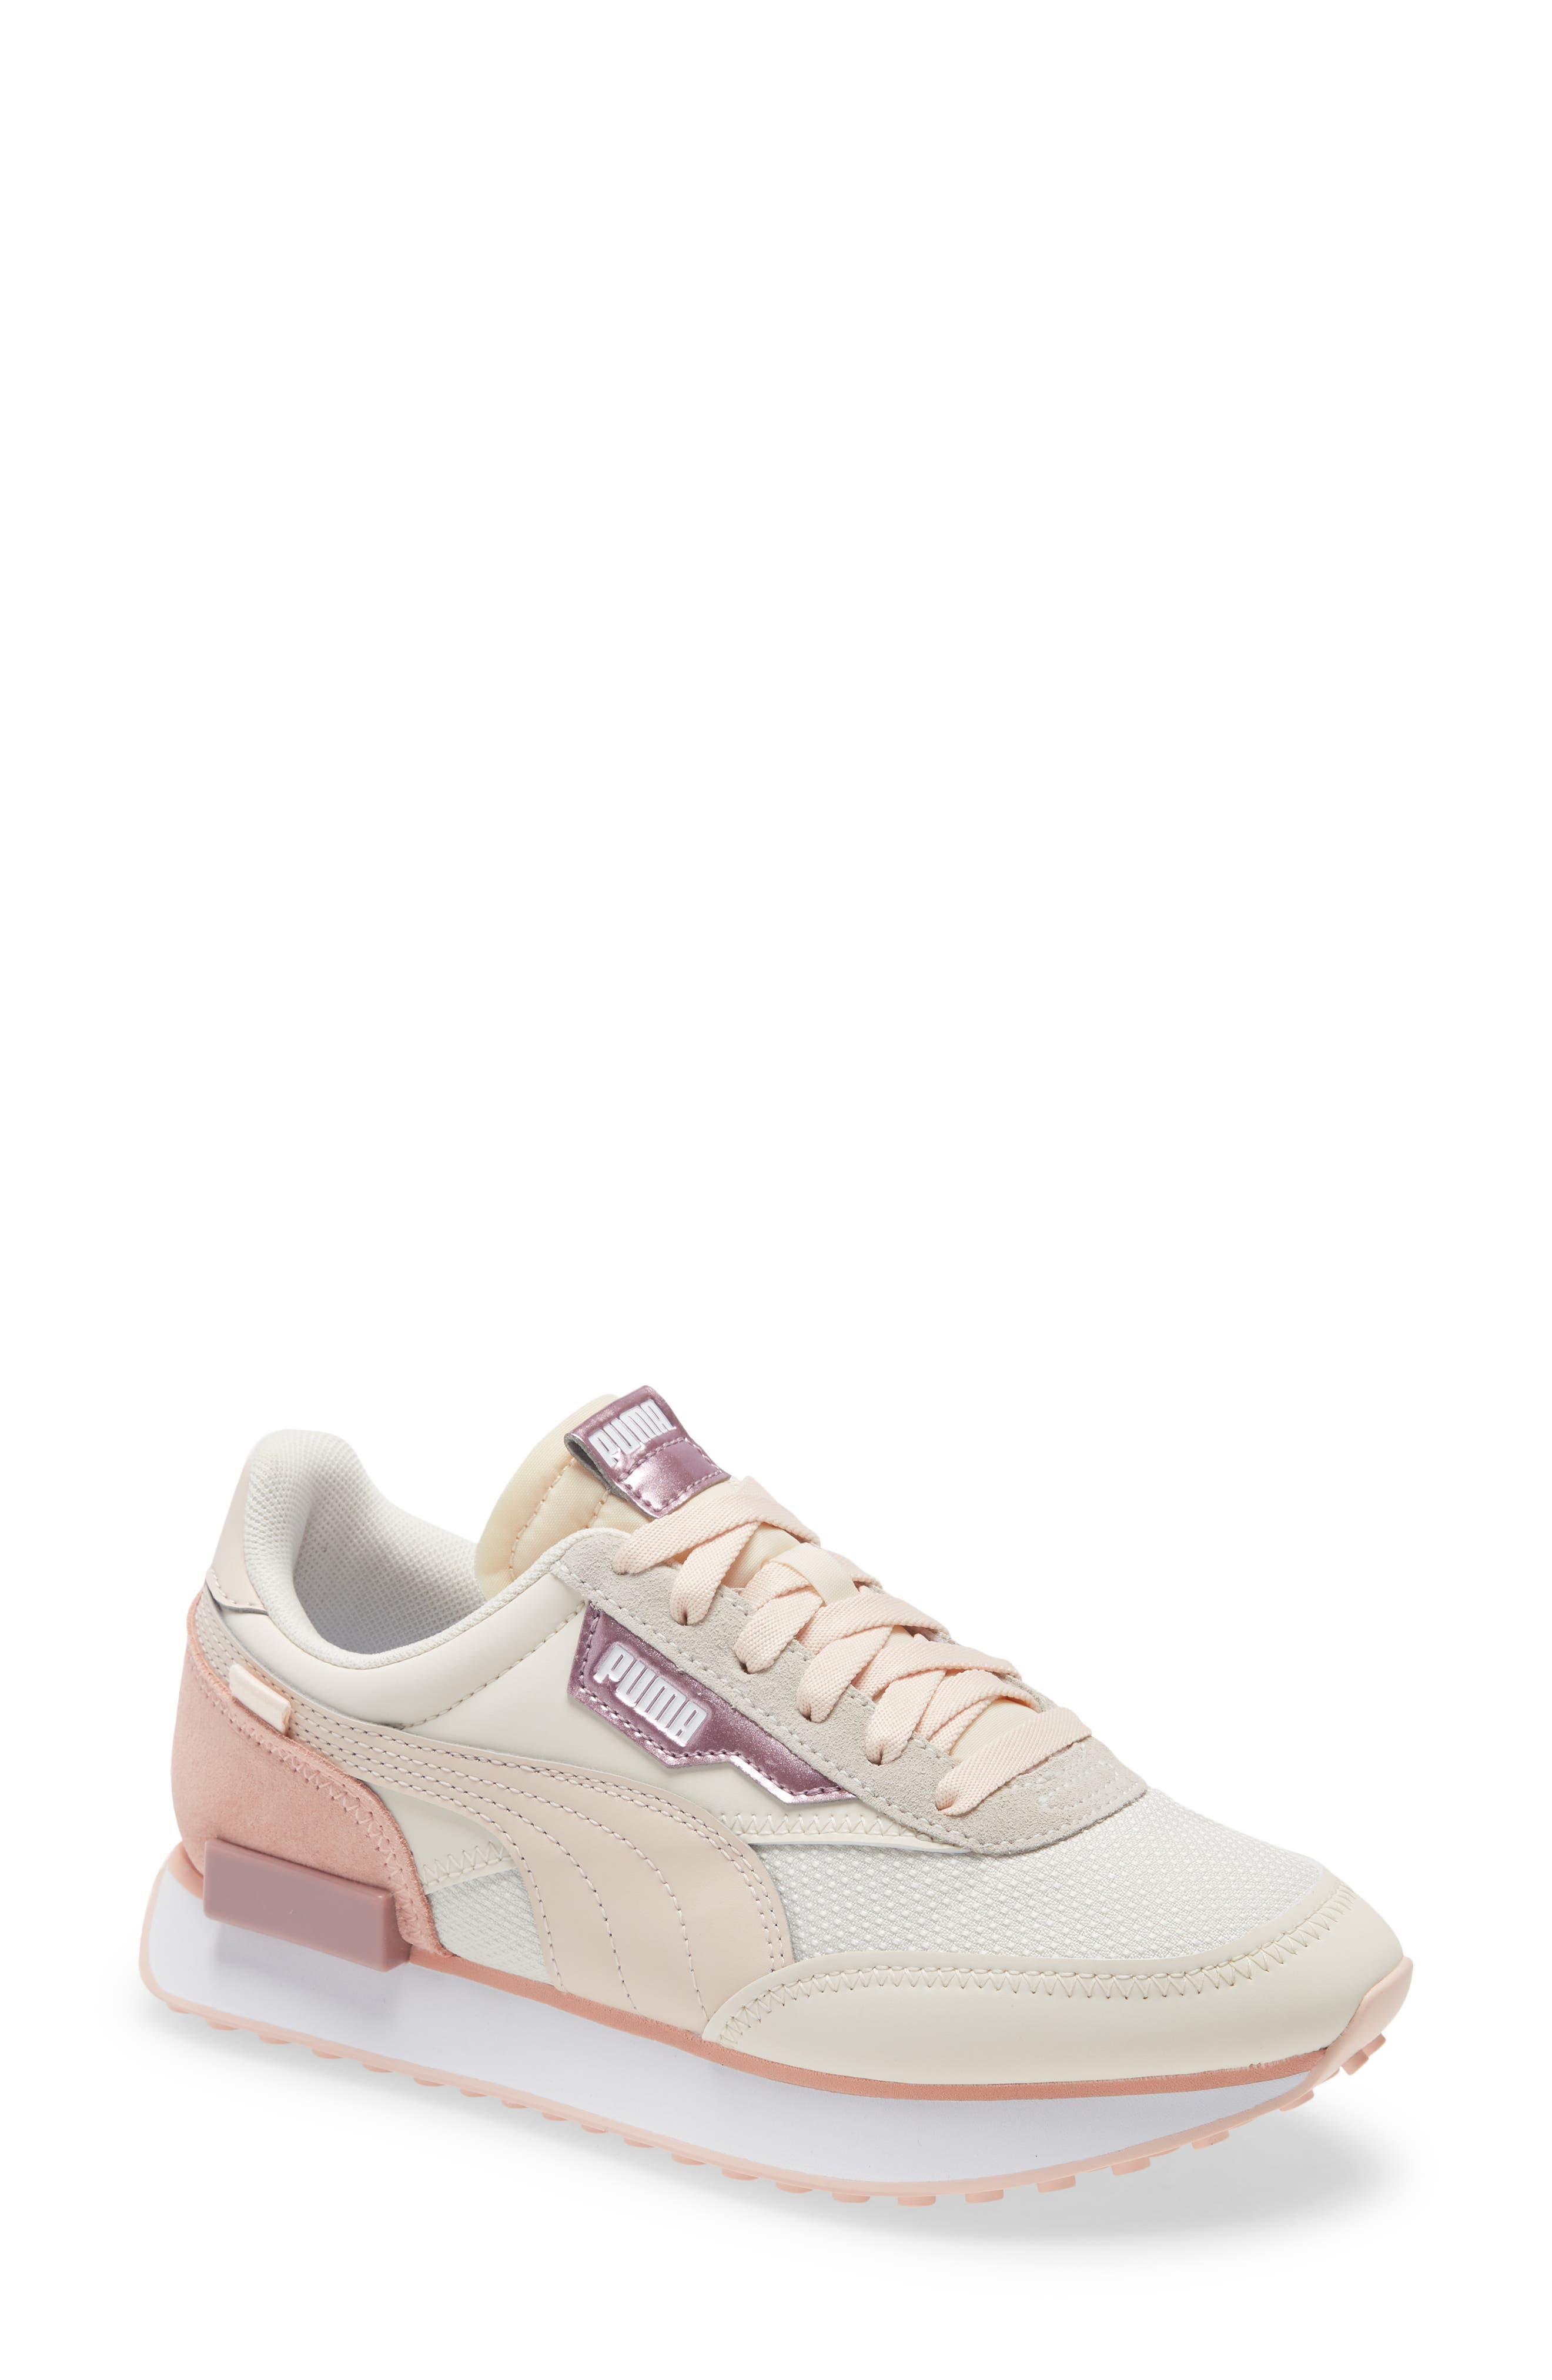 puma shoes for women latest